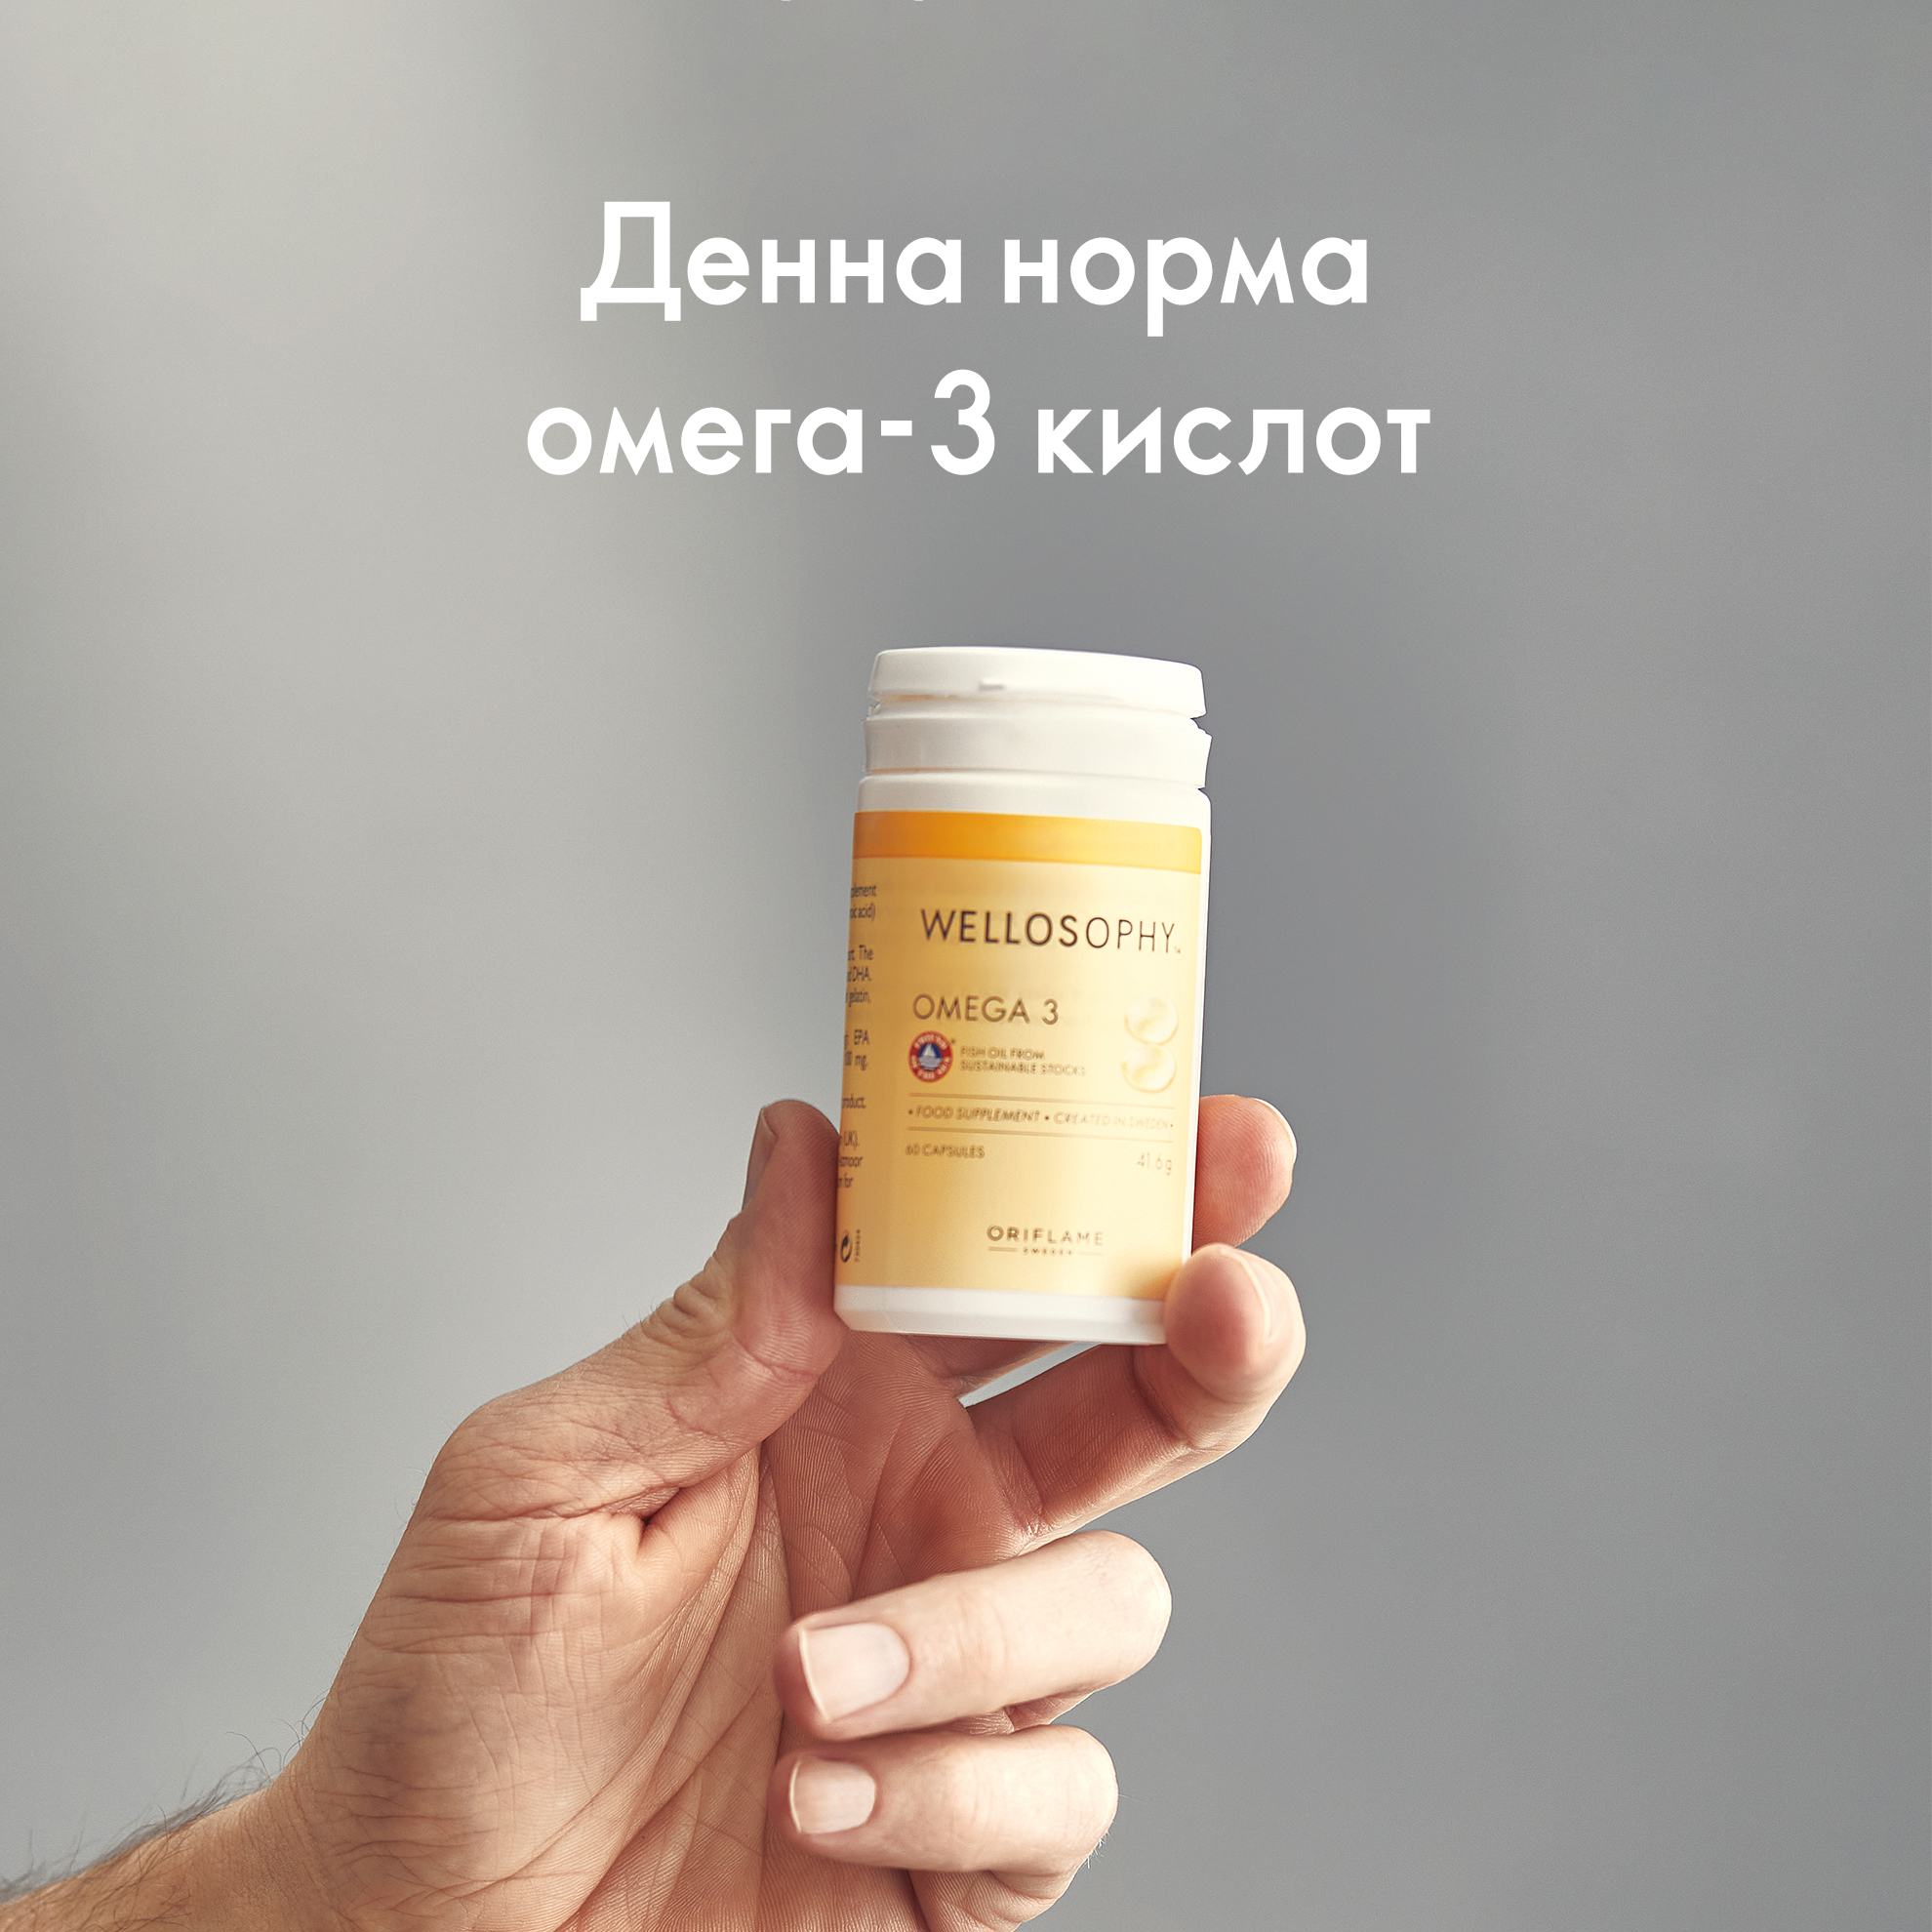 https://media-cdn.oriflame.com/productImage?externalMediaId=product-management-media%2fProducts%2f38556%2fUA%2f38556_4.png&id=18407477&version=1